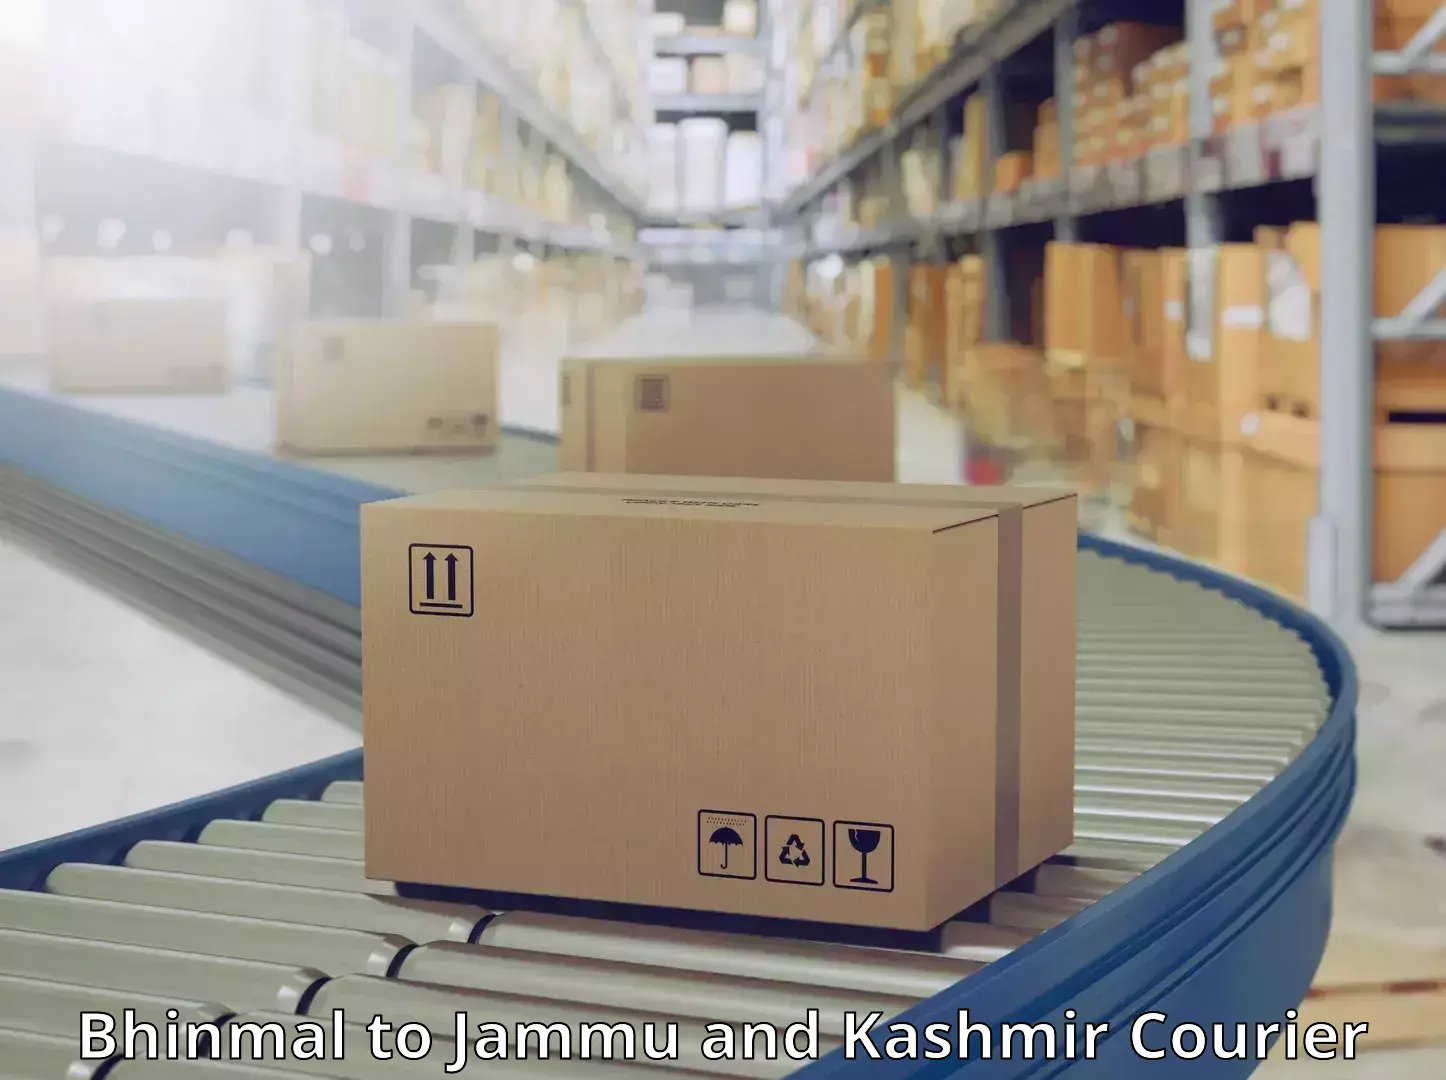 Courier service partnerships Bhinmal to Pulwama